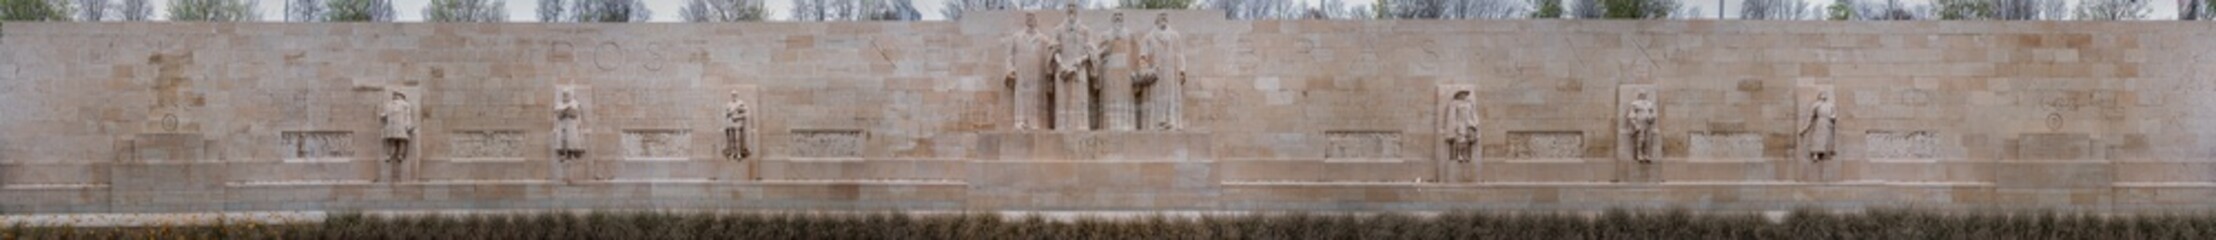 Reformation Wall Monument - Panoramic view of the entire wall - Geneva, Switzerland